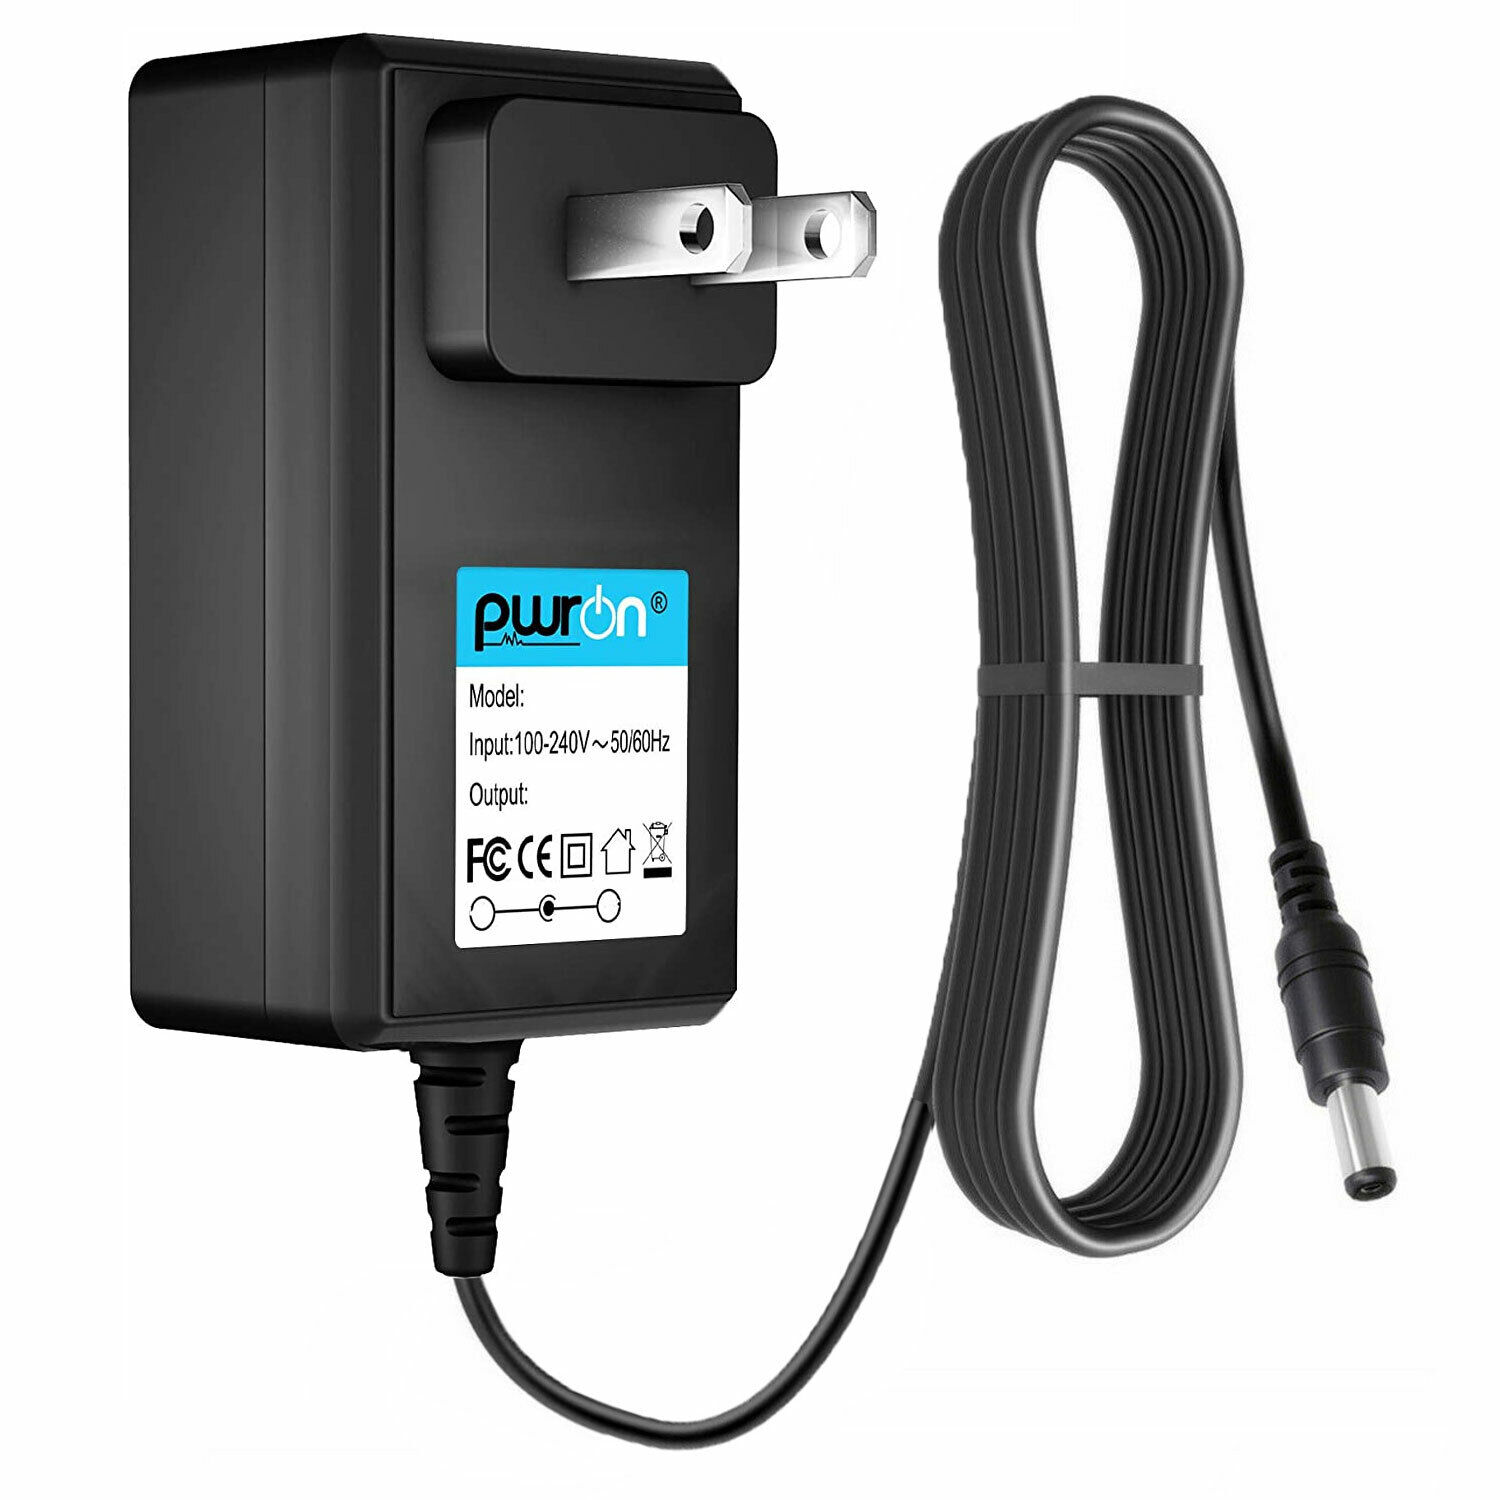 PwrON AC DC Adapter for Sole pn: 000137 E060717 SOLRP0106 Elliptical Power Cord